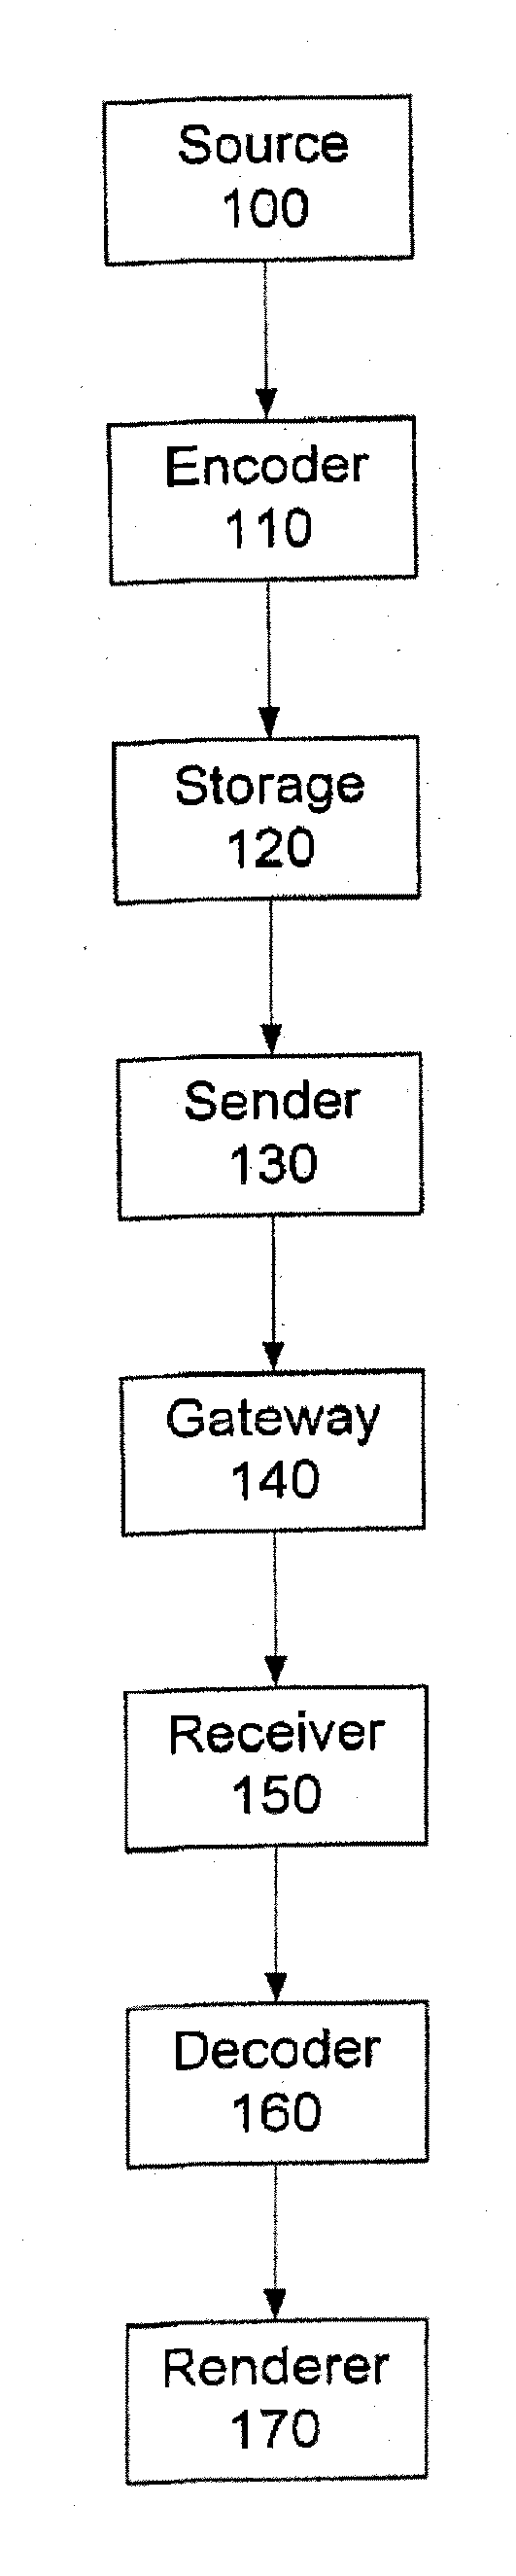 Slice groups and data partitioning in scalable video coding